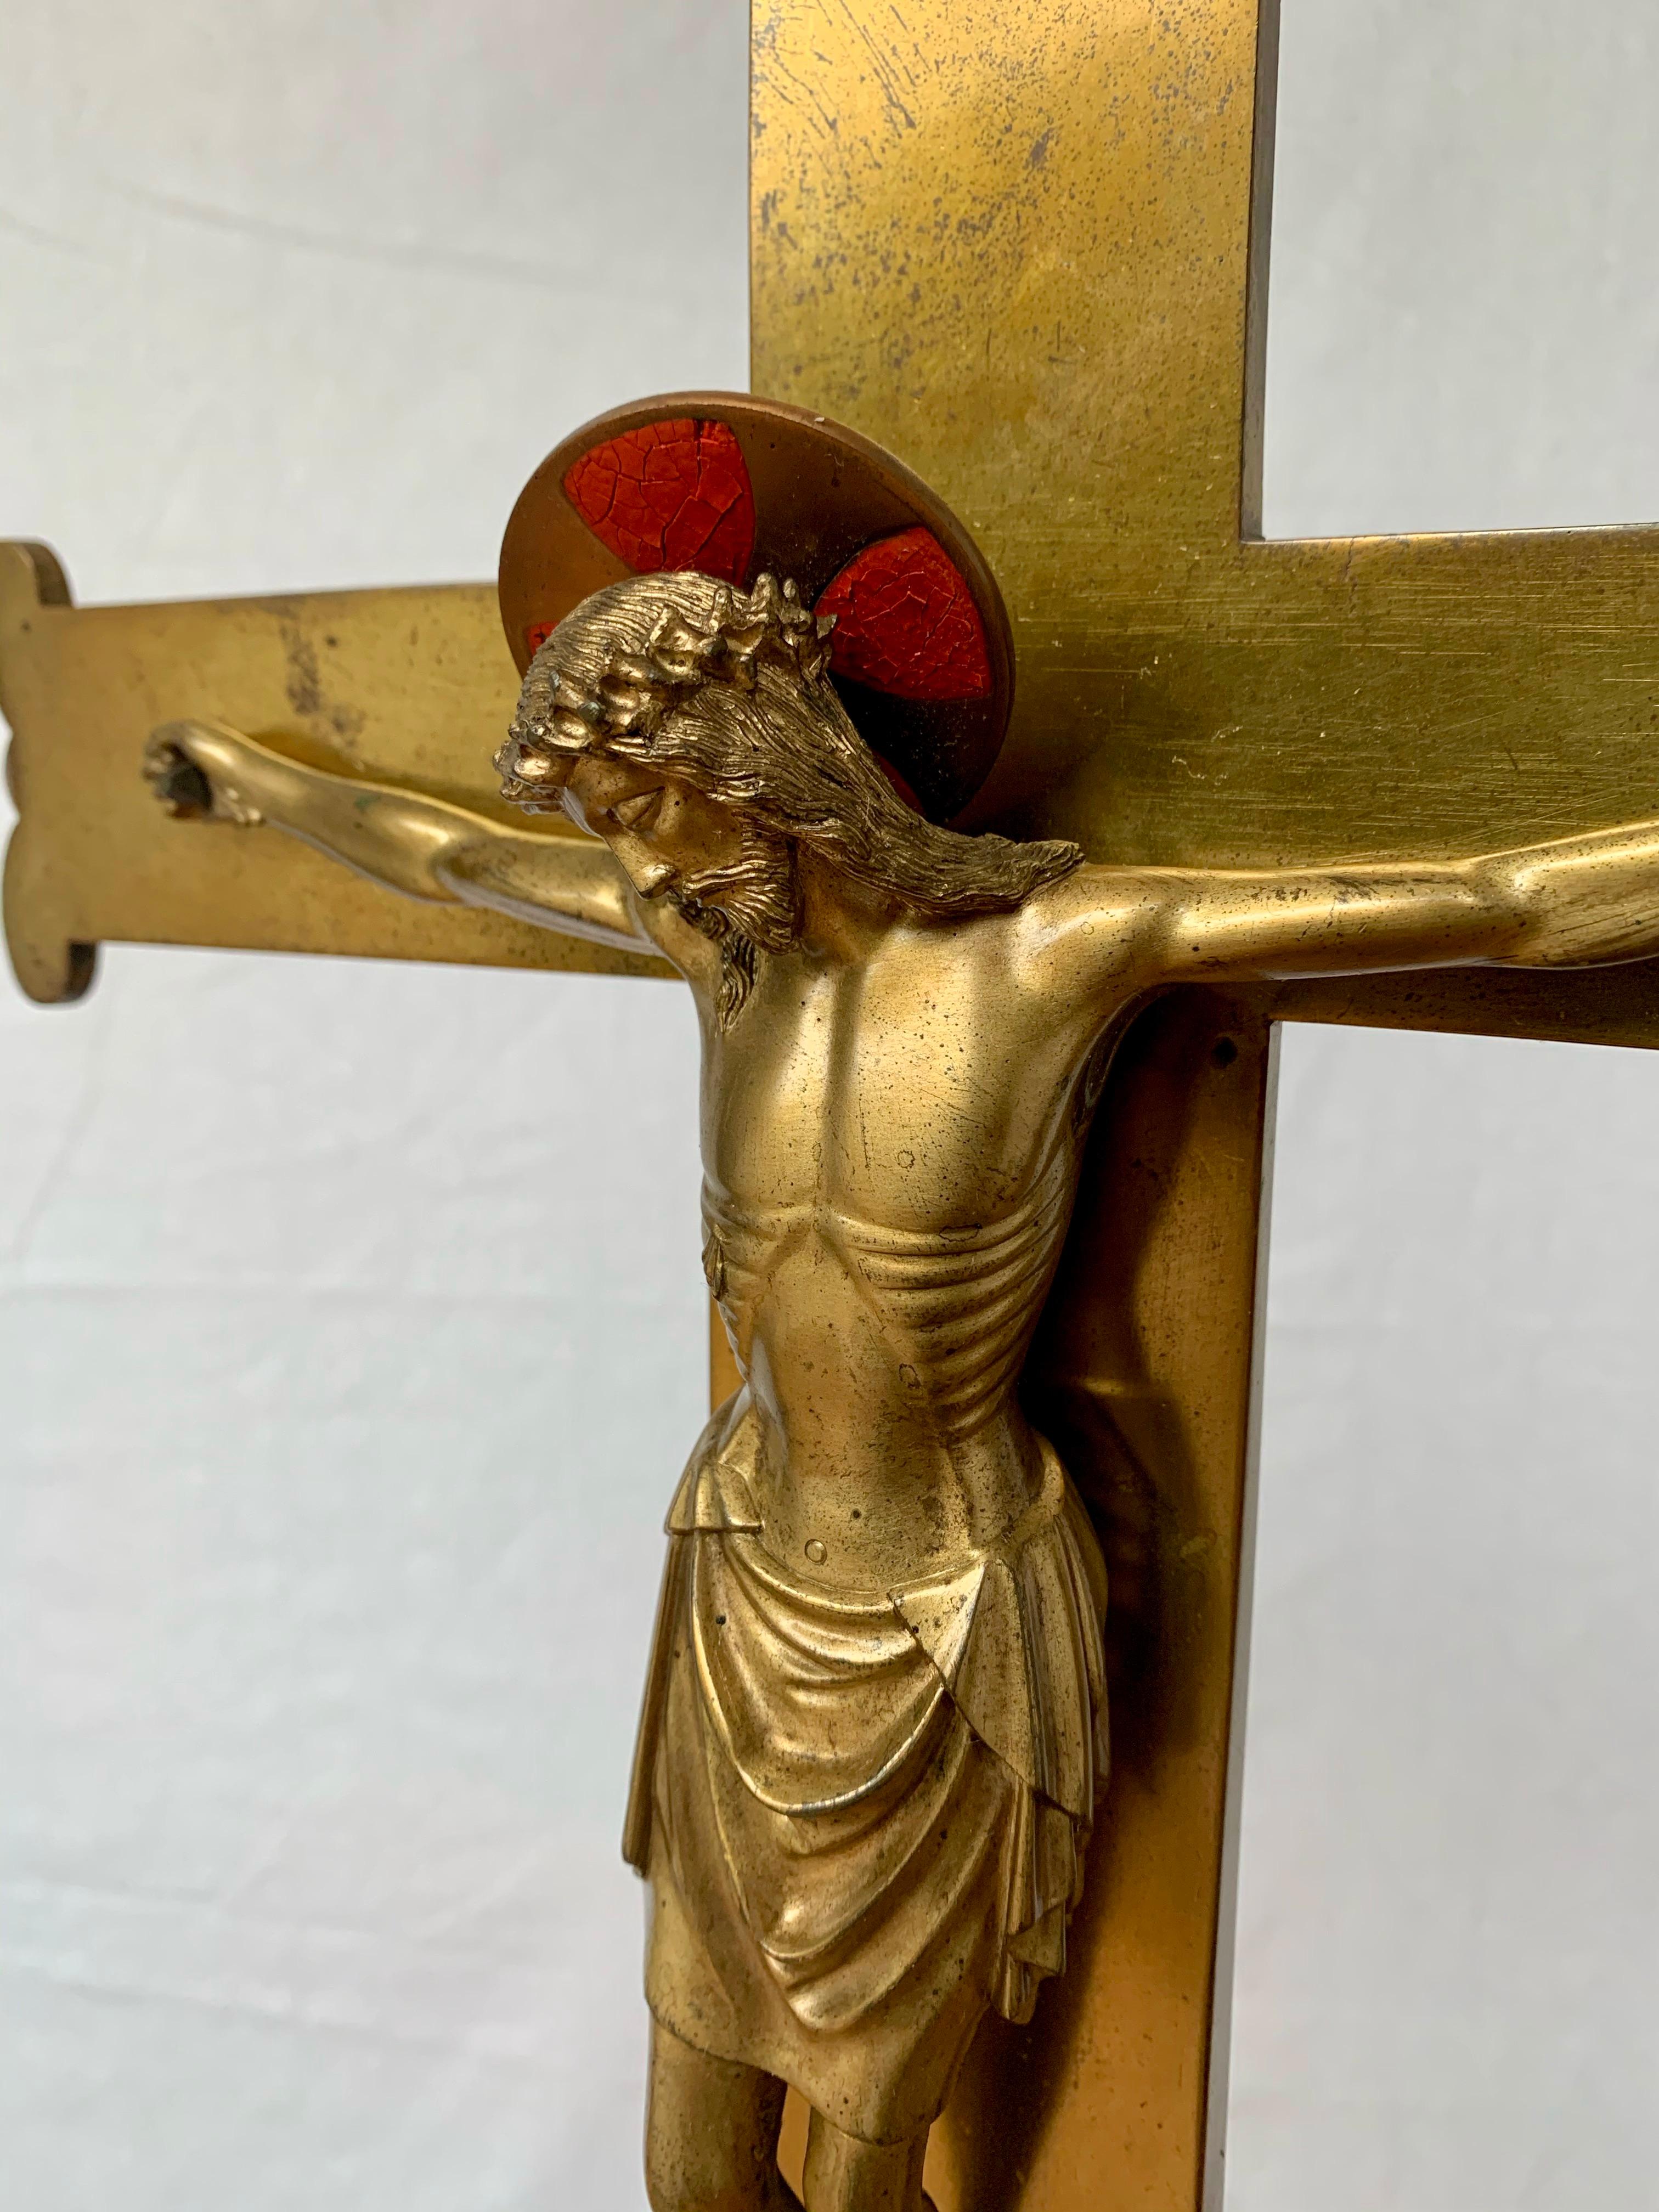 Polished Stunning & Large Altar Crucifix with Detailed Bronze Sculpture of Christ, 1910s